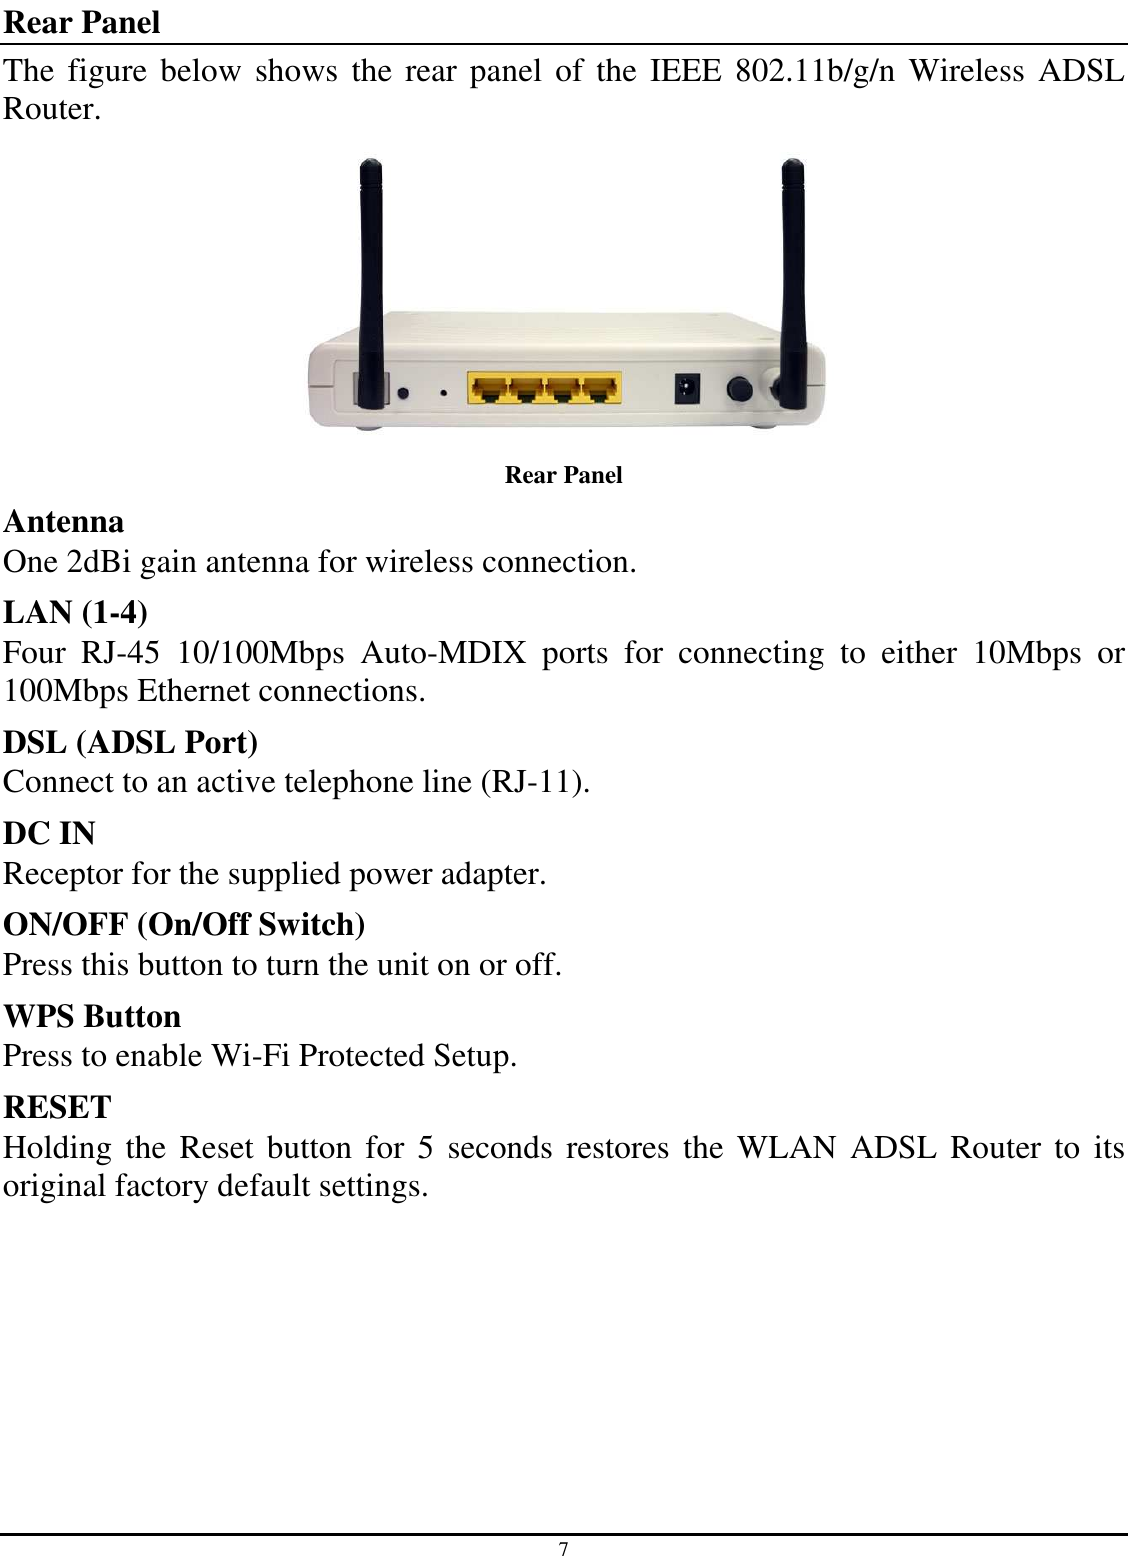 7 Rear Panel The figure below shows the rear panel of the IEEE  802.11b/g/n  Wireless  ADSL Router.  Rear Panel Antenna One 2dBi gain antenna for wireless connection. LAN (1-4) Four  RJ-45  10/100Mbps  Auto-MDIX  ports  for  connecting  to  either  10Mbps  or 100Mbps Ethernet connections. DSL (ADSL Port) Connect to an active telephone line (RJ-11). DC IN Receptor for the supplied power adapter. ON/OFF (On/Off Switch) Press this button to turn the unit on or off. WPS Button Press to enable Wi-Fi Protected Setup. RESET Holding the  Reset button  for  5  seconds  restores  the  WLAN  ADSL Router to its original factory default settings. 